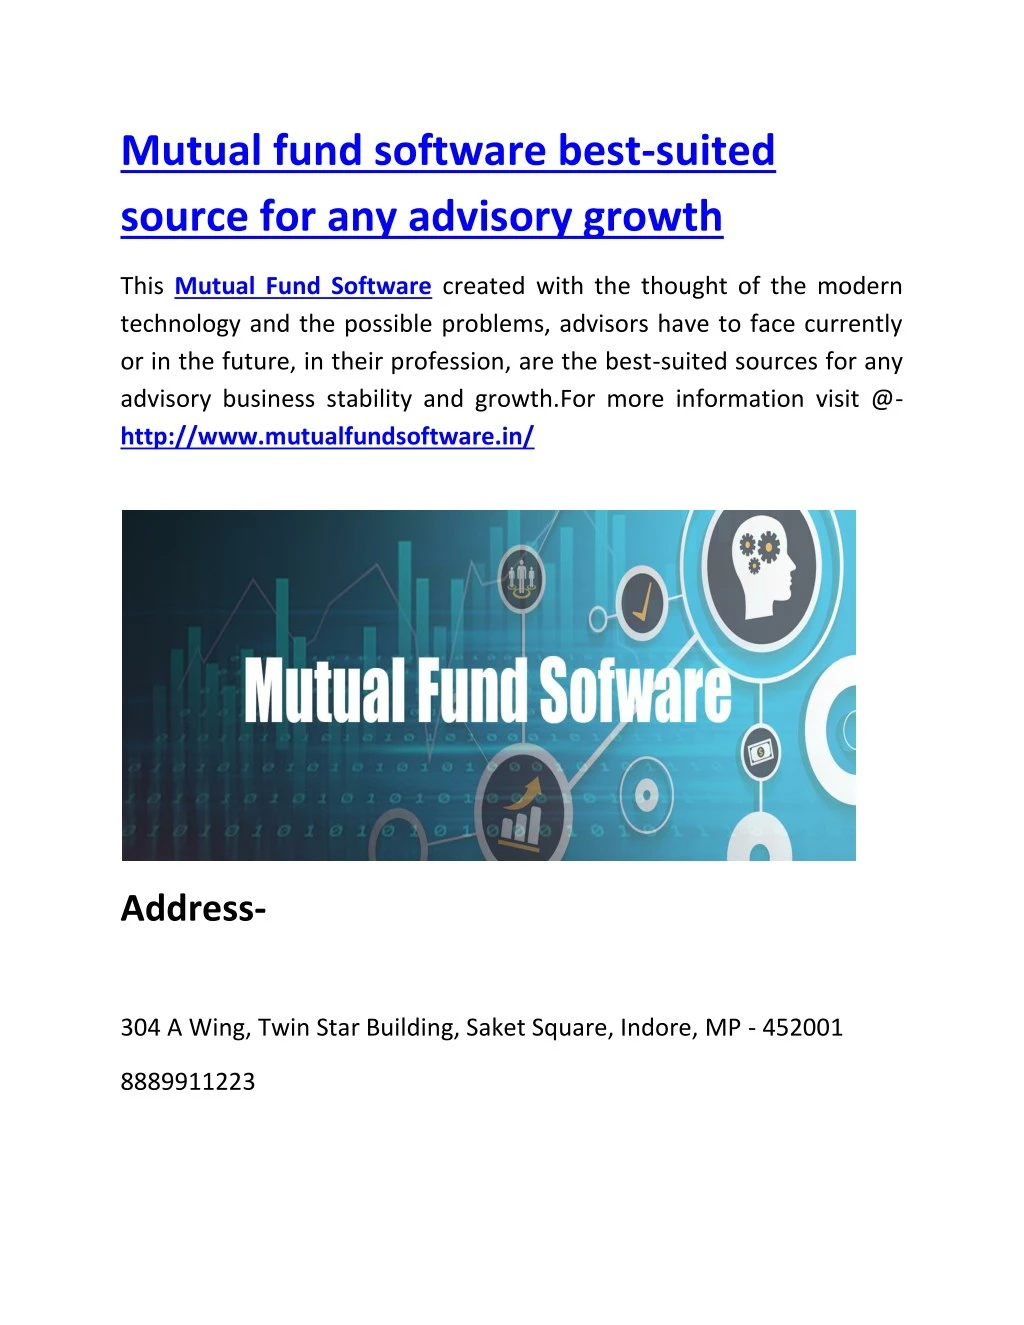 mutual fund software best suited source